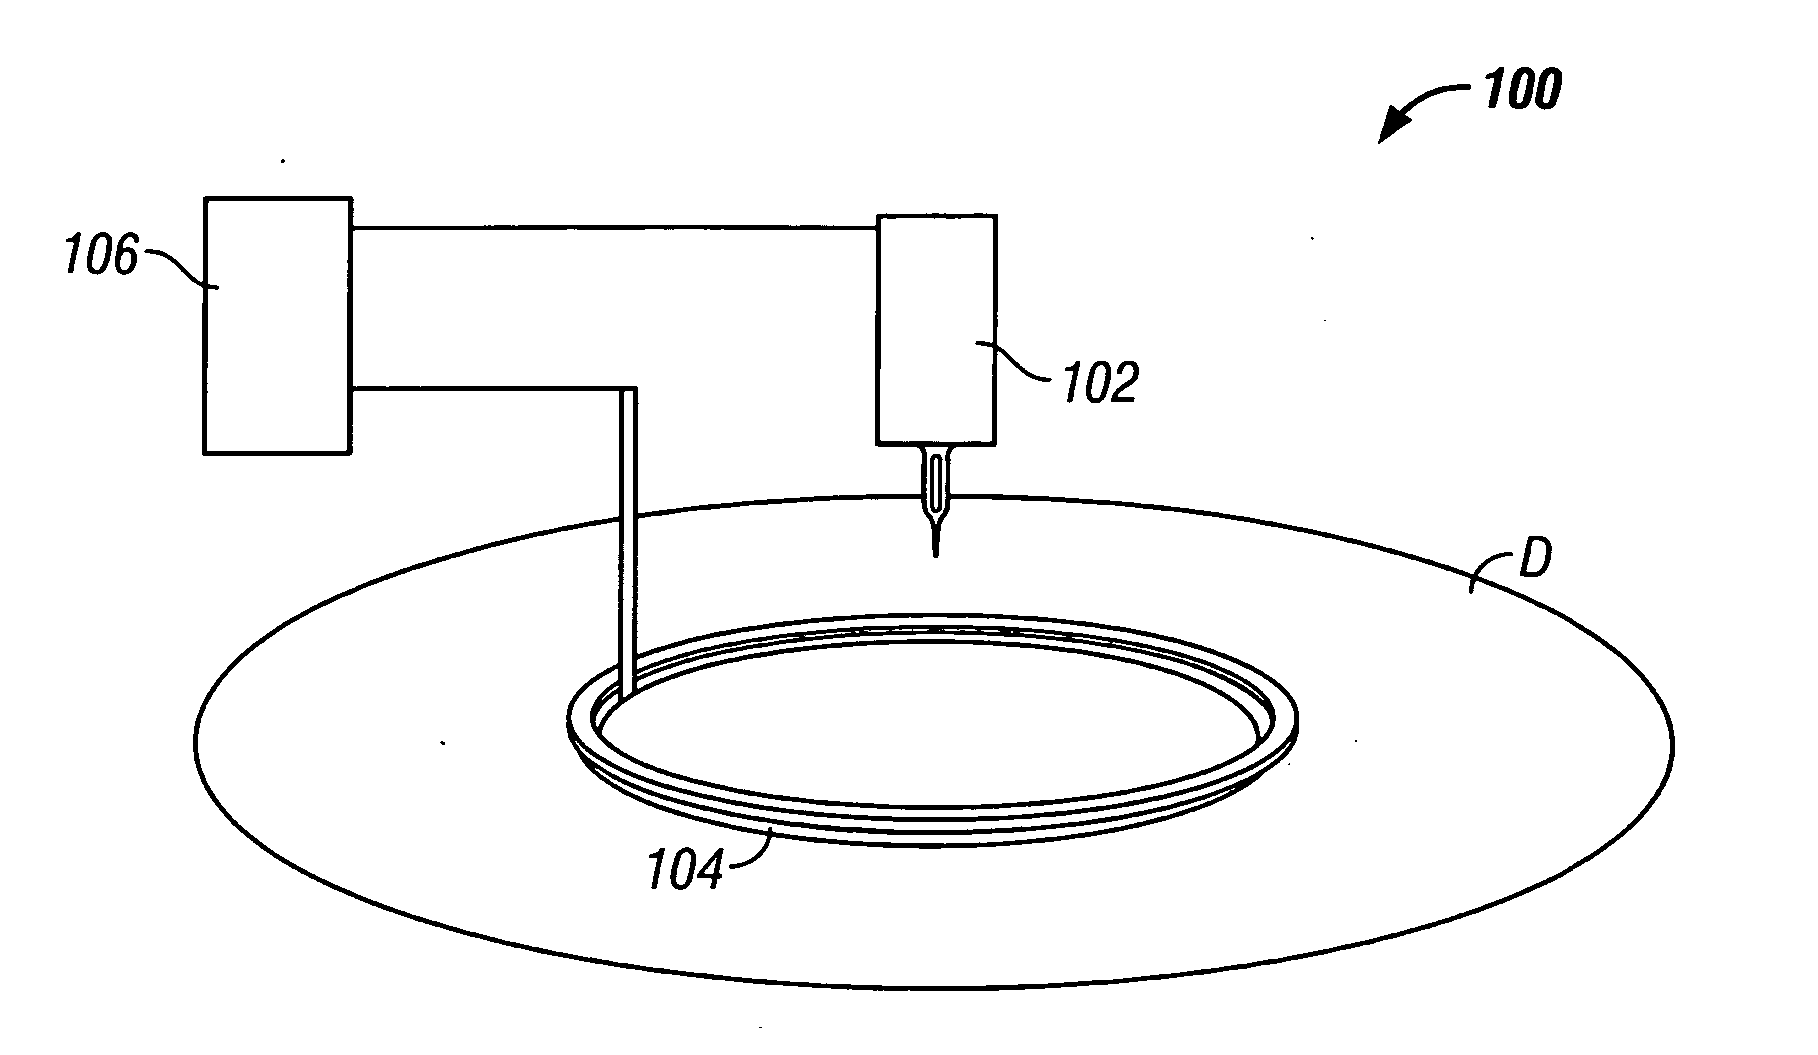 System and method for piercing dermal tissue